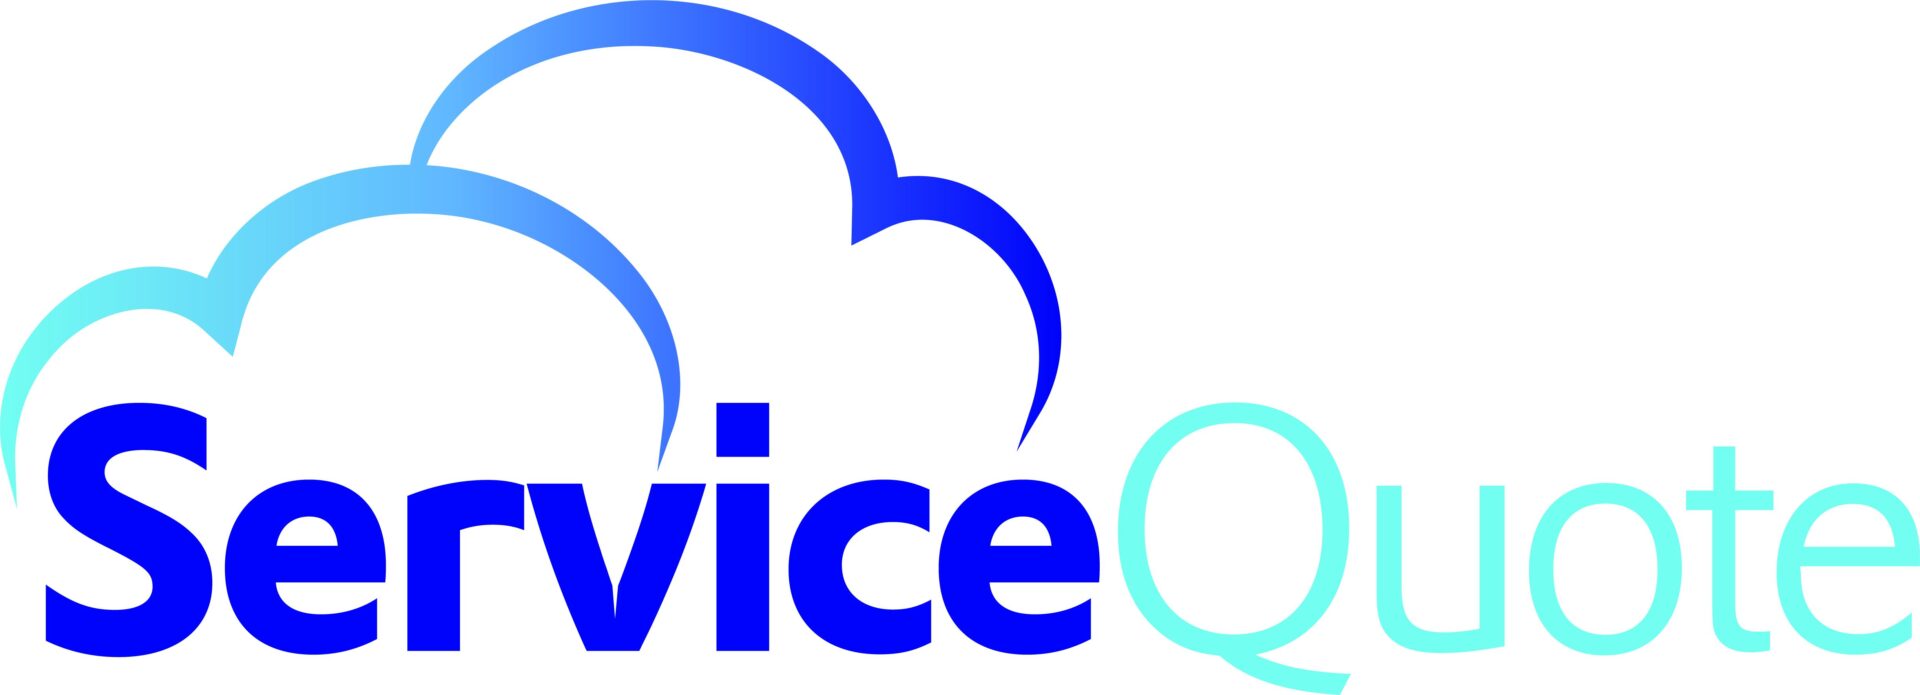 A blue and white logo for service quest